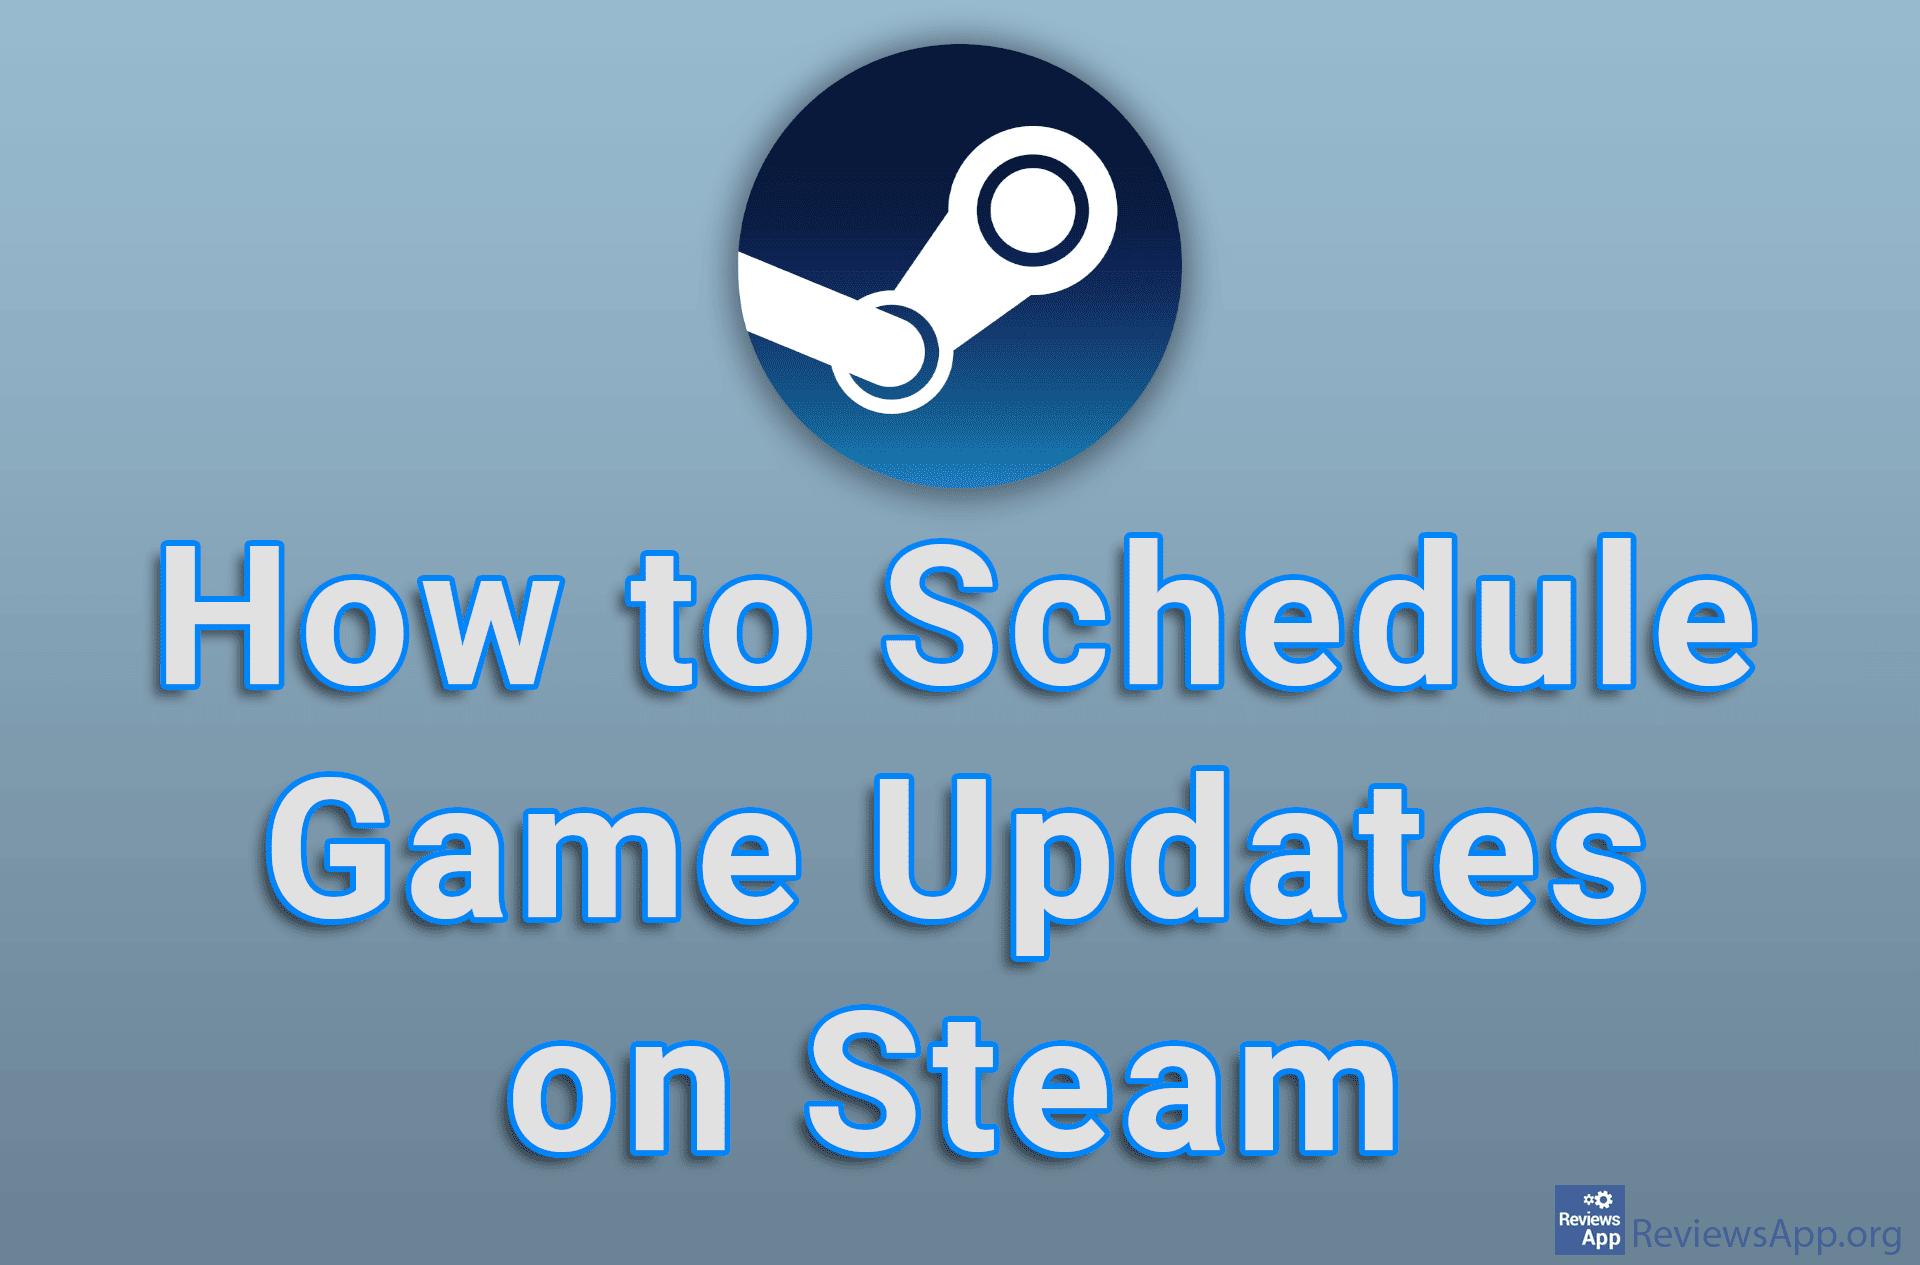 How to Schedule Game Updates on Steam